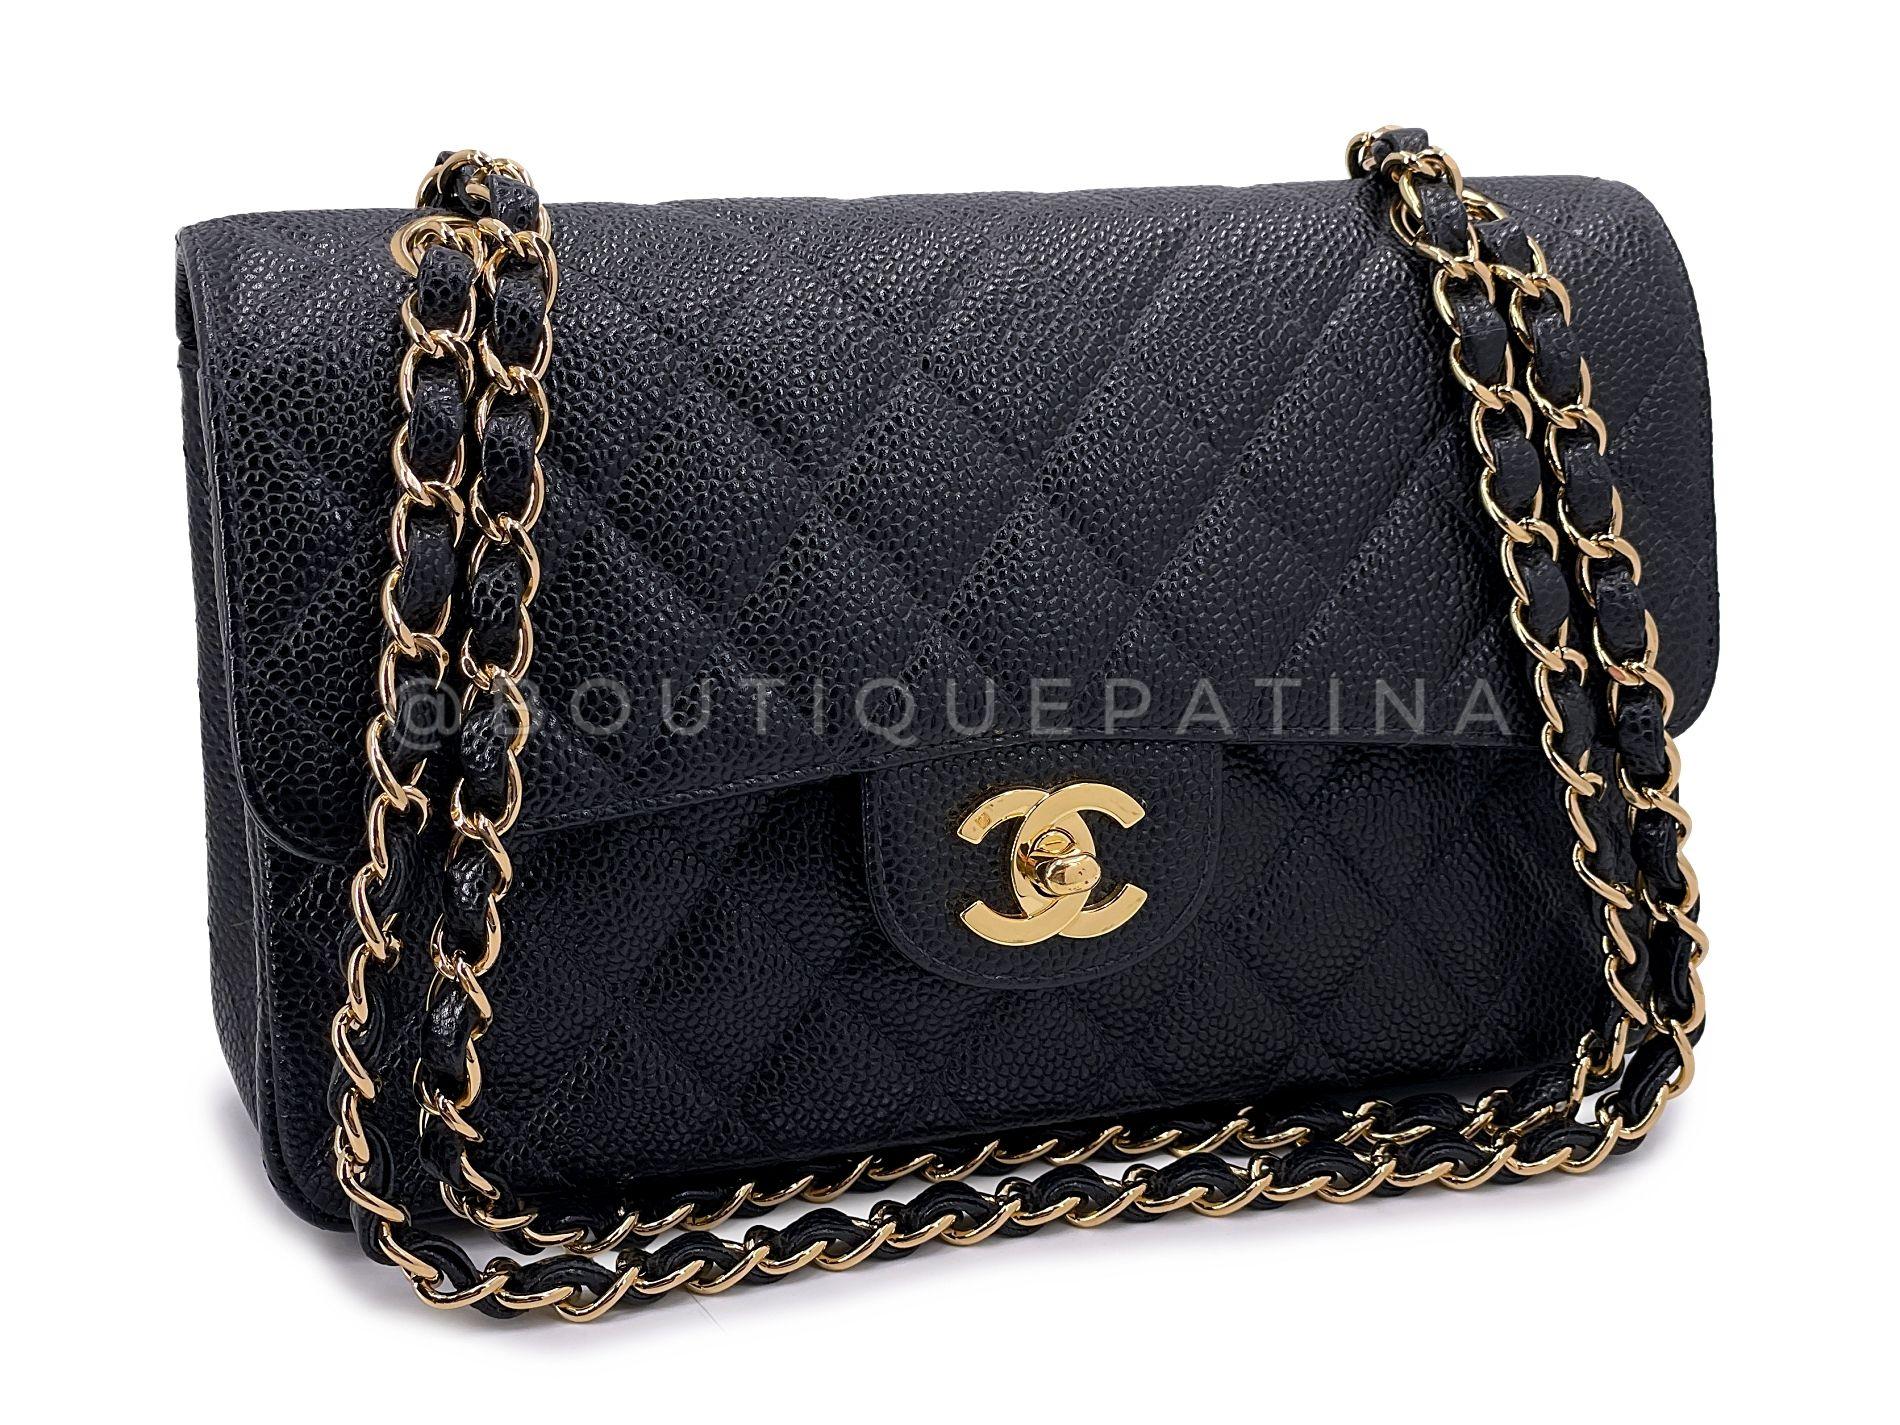 Store item: 67931
We believe there aren't many bags left of this kind - vintage 24k gold plated hardware small caviar Chanel classic double flaps in excellent condition. For 20 years, Boutique Patina has specialized in sourcing and curating the most